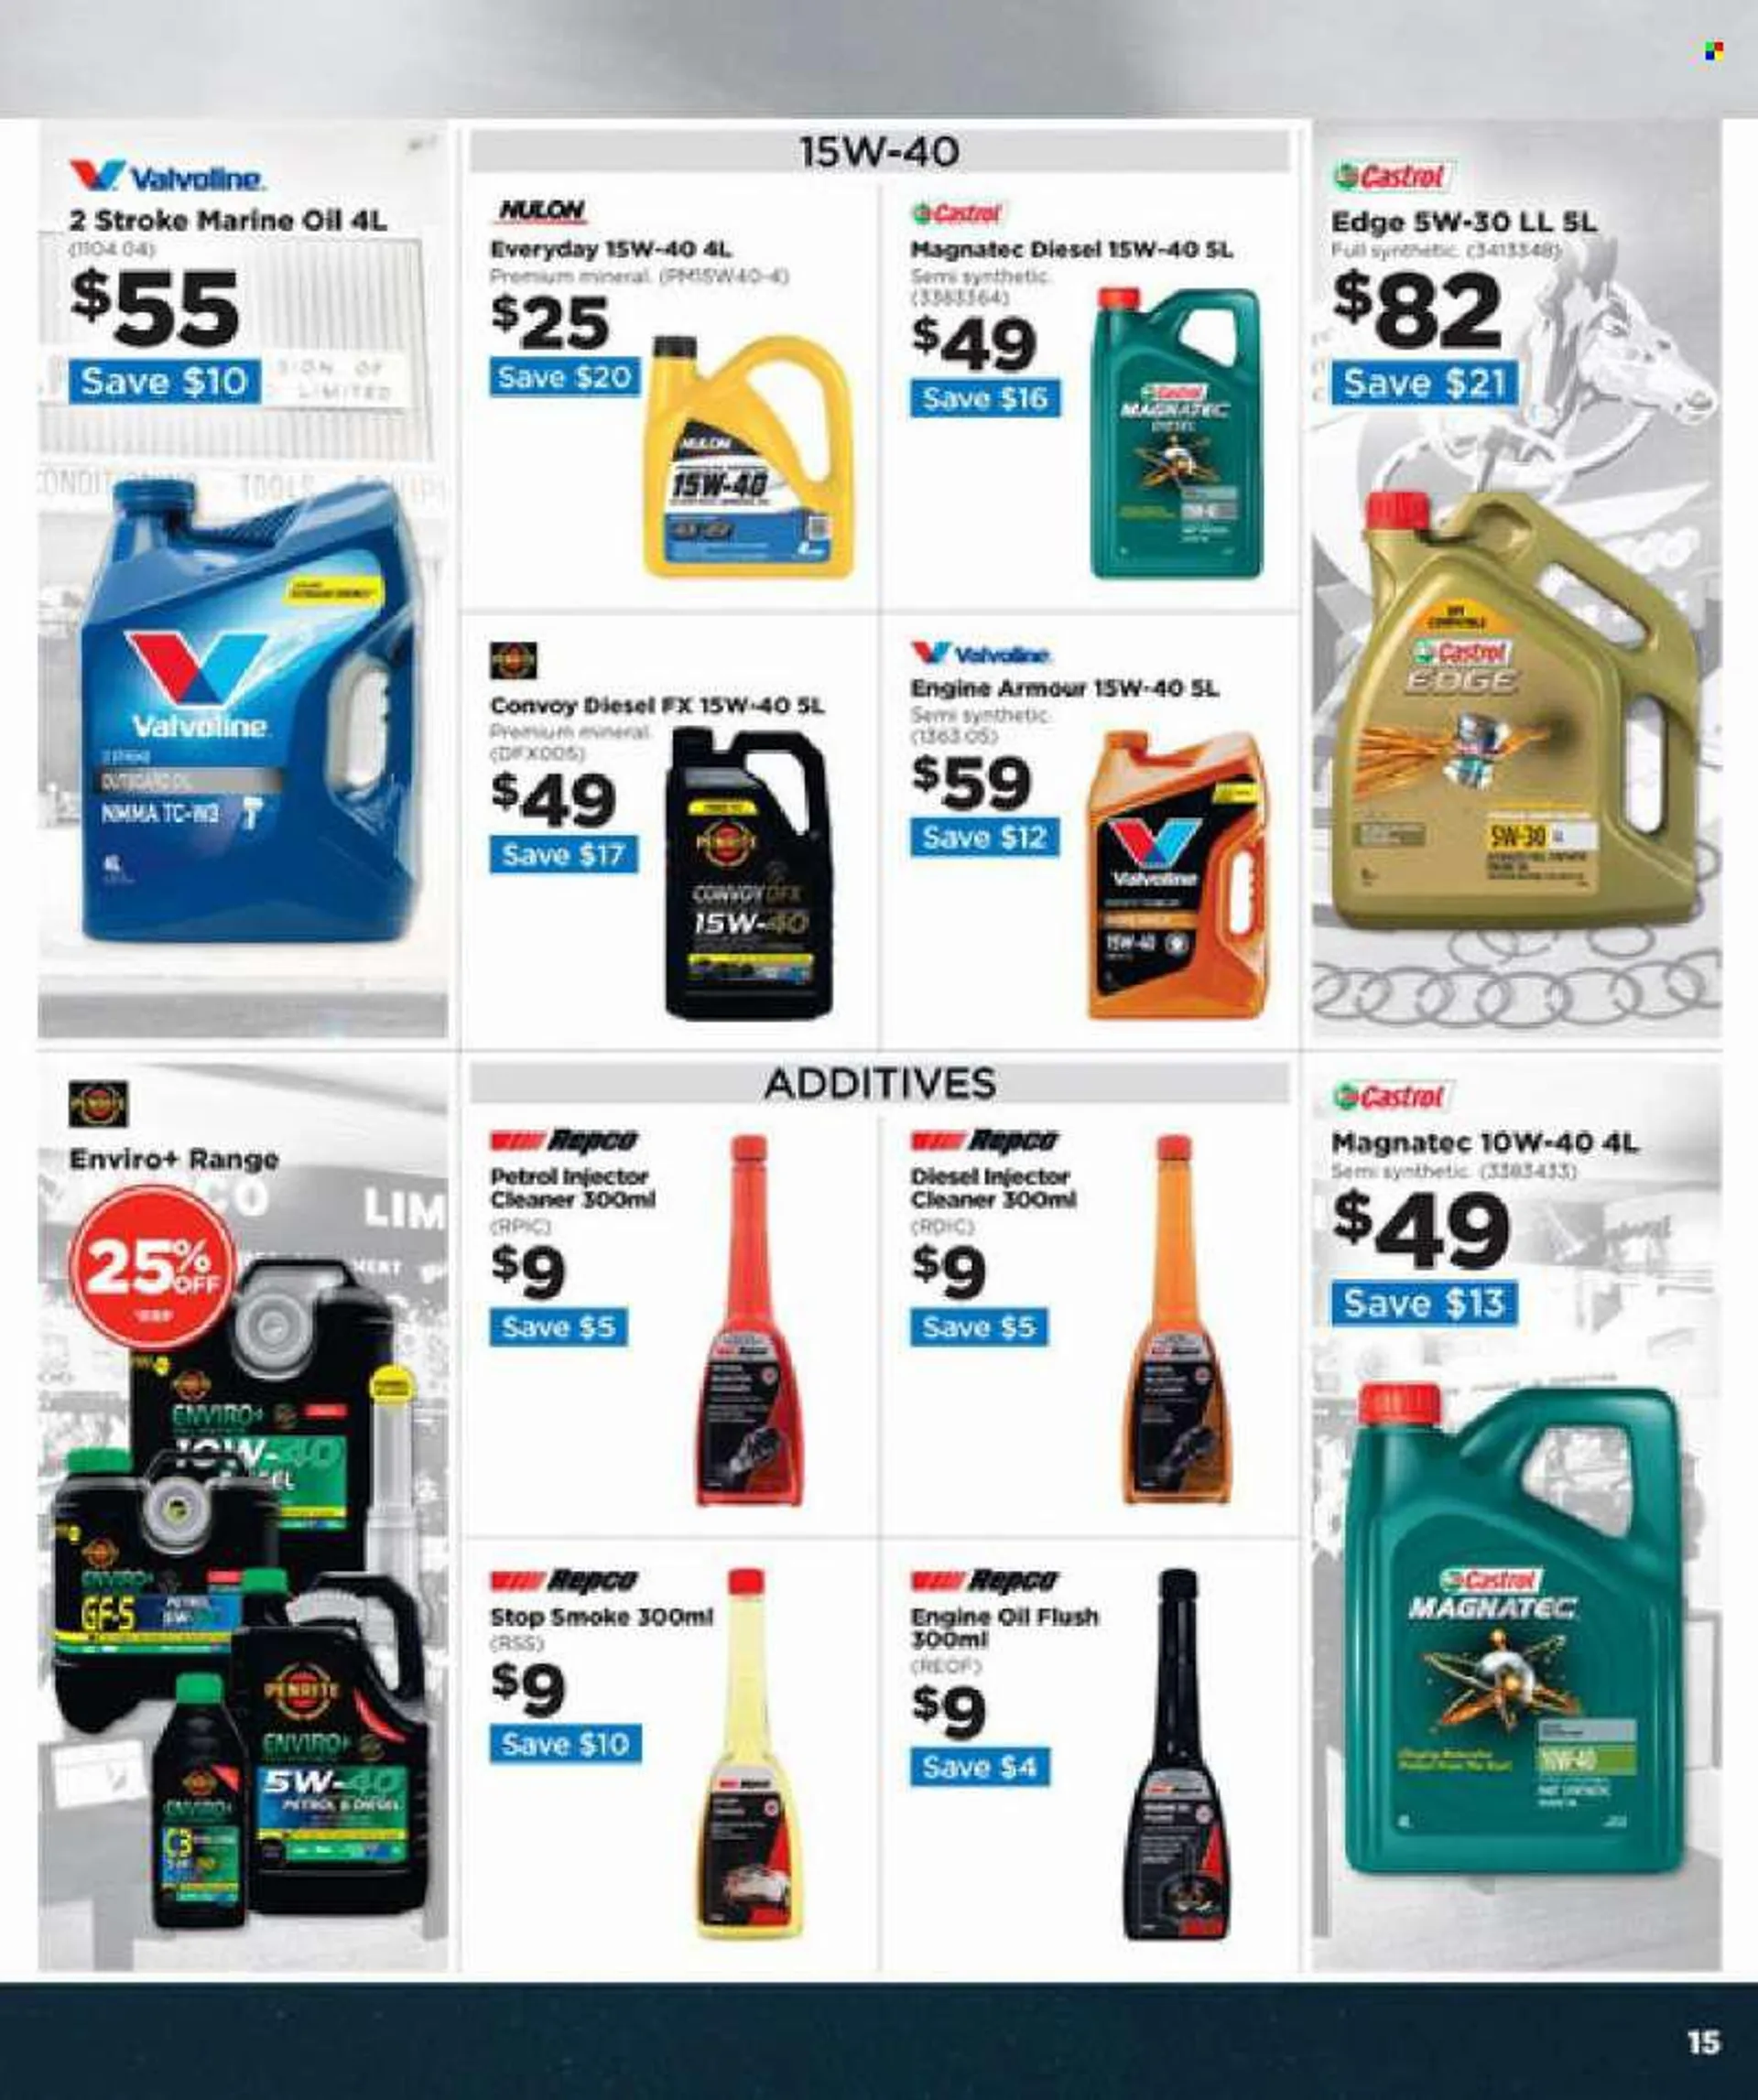 Repco mailer - 20.04.2022 - 03.05.2022. - 20 April 3 May 2022 - Page 15